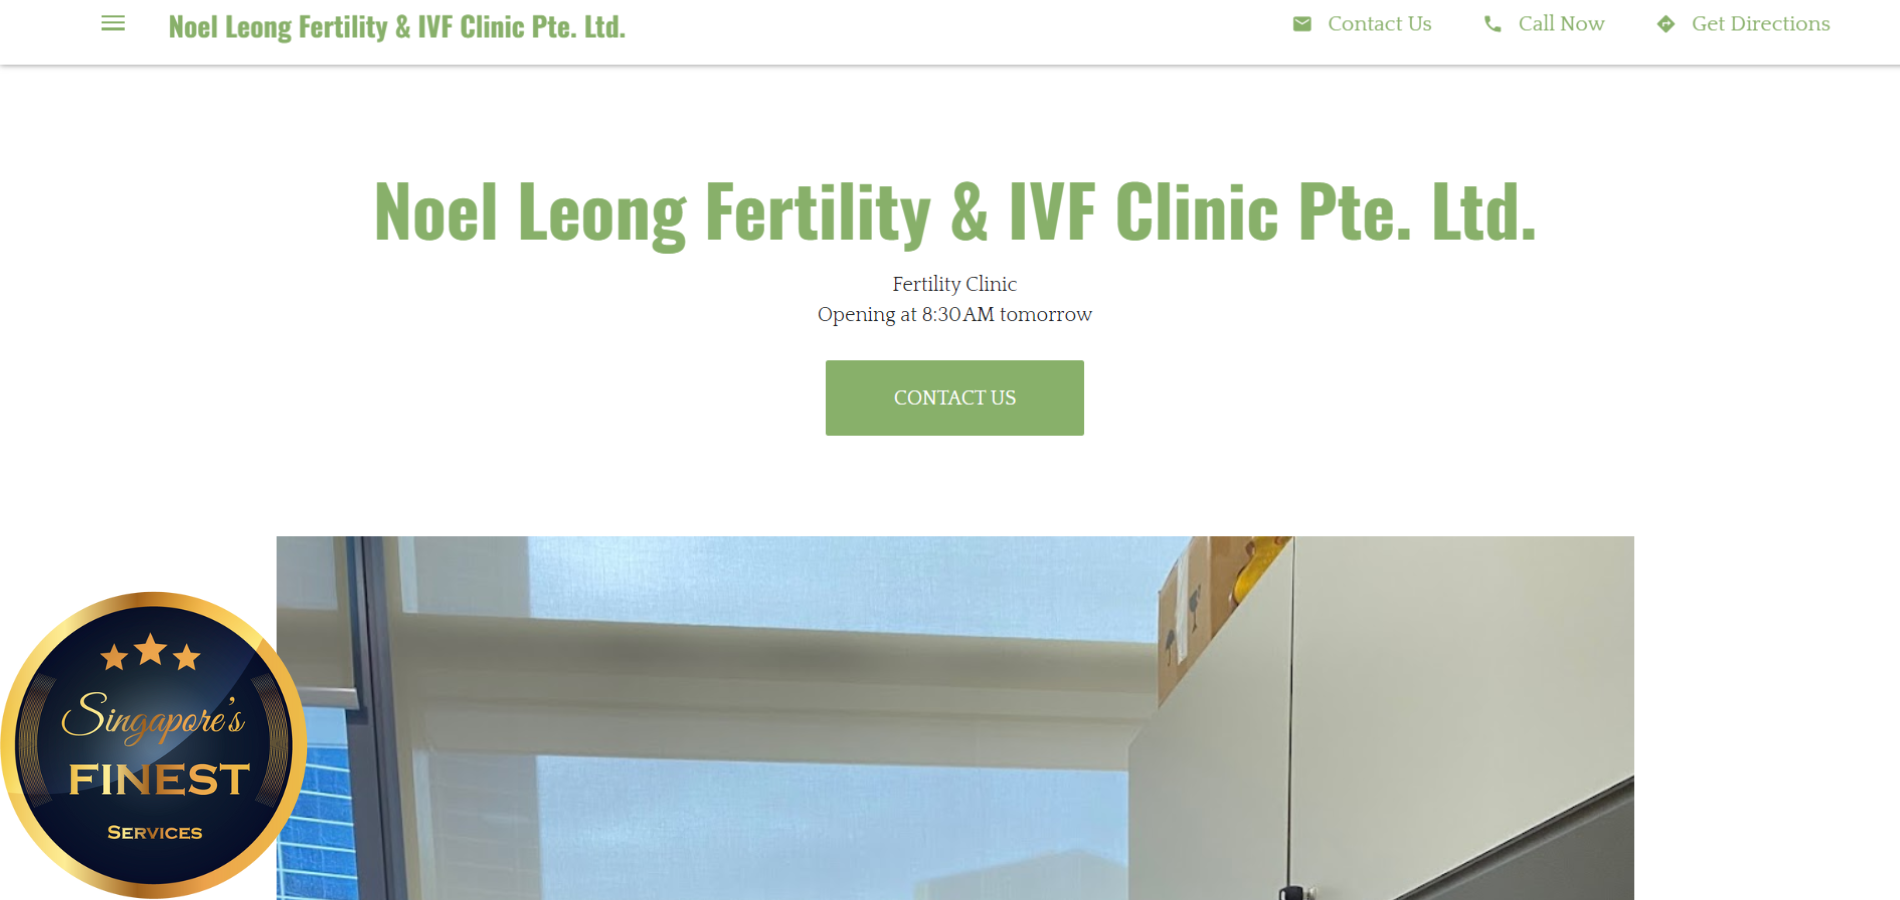 The Finest Fertility Clinics in Singapore